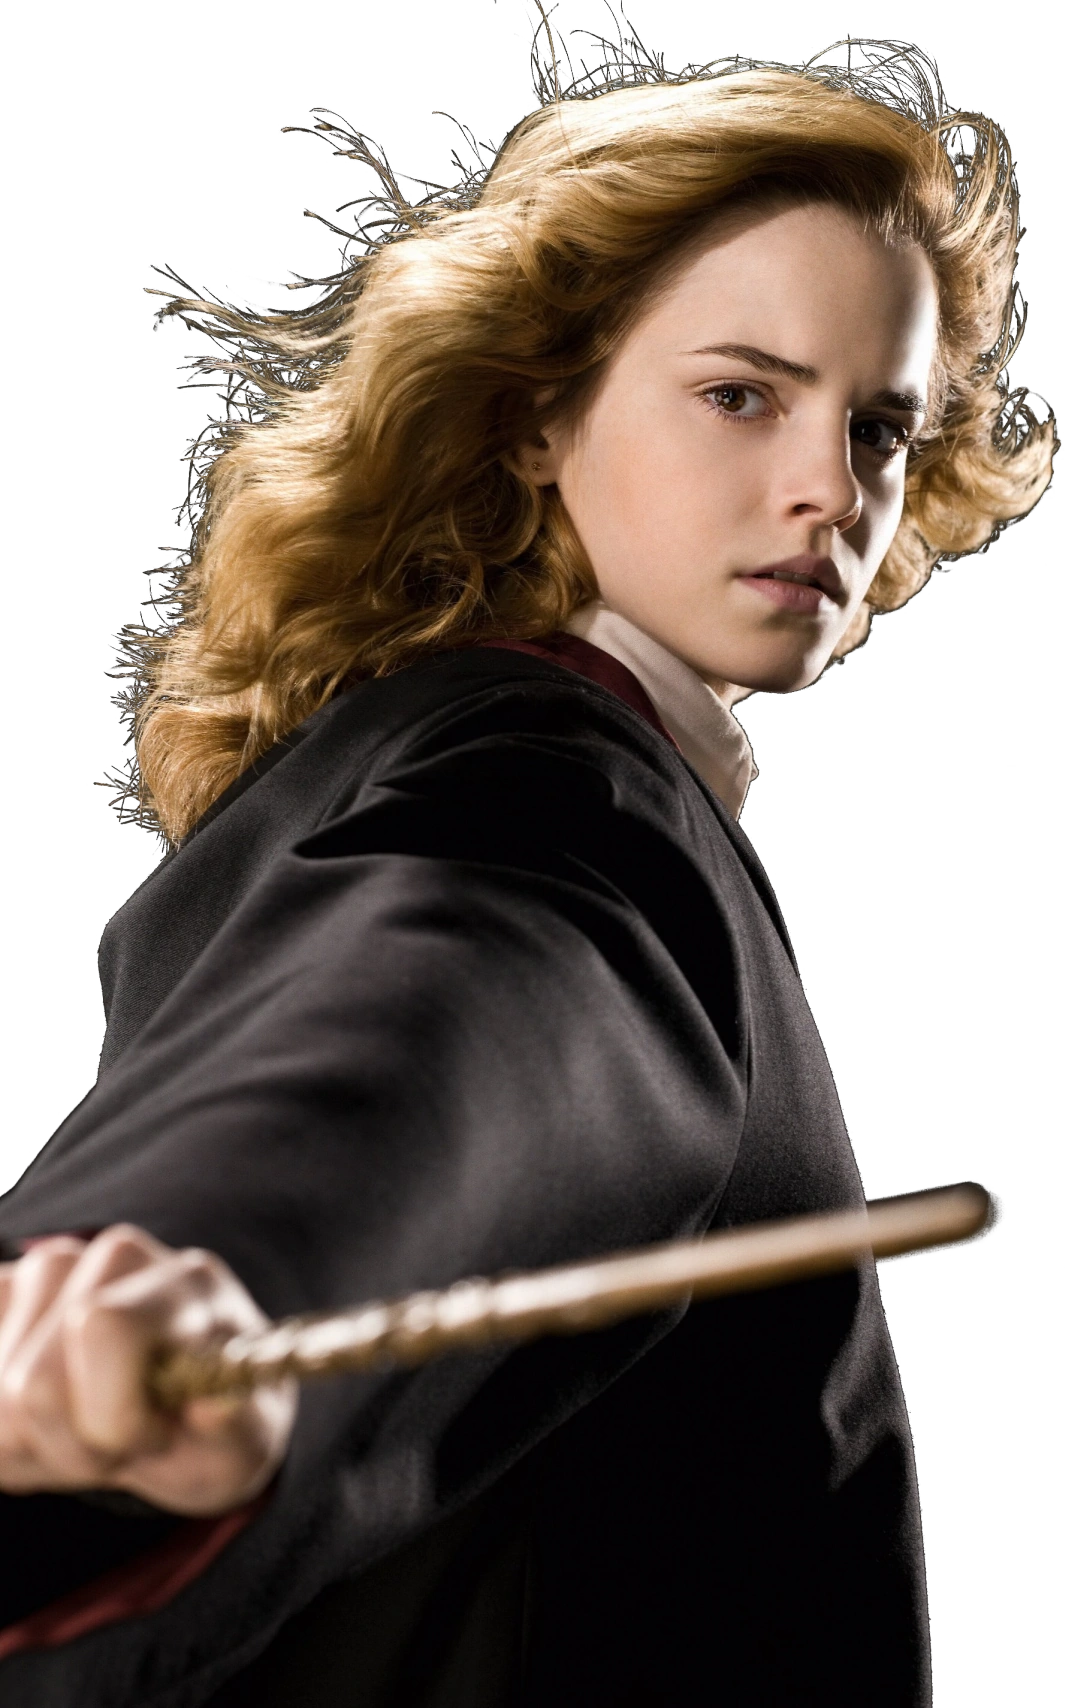 The Ultimate Hermione Granger Image Compilation Stunning Collection Of Hermione Granger Images